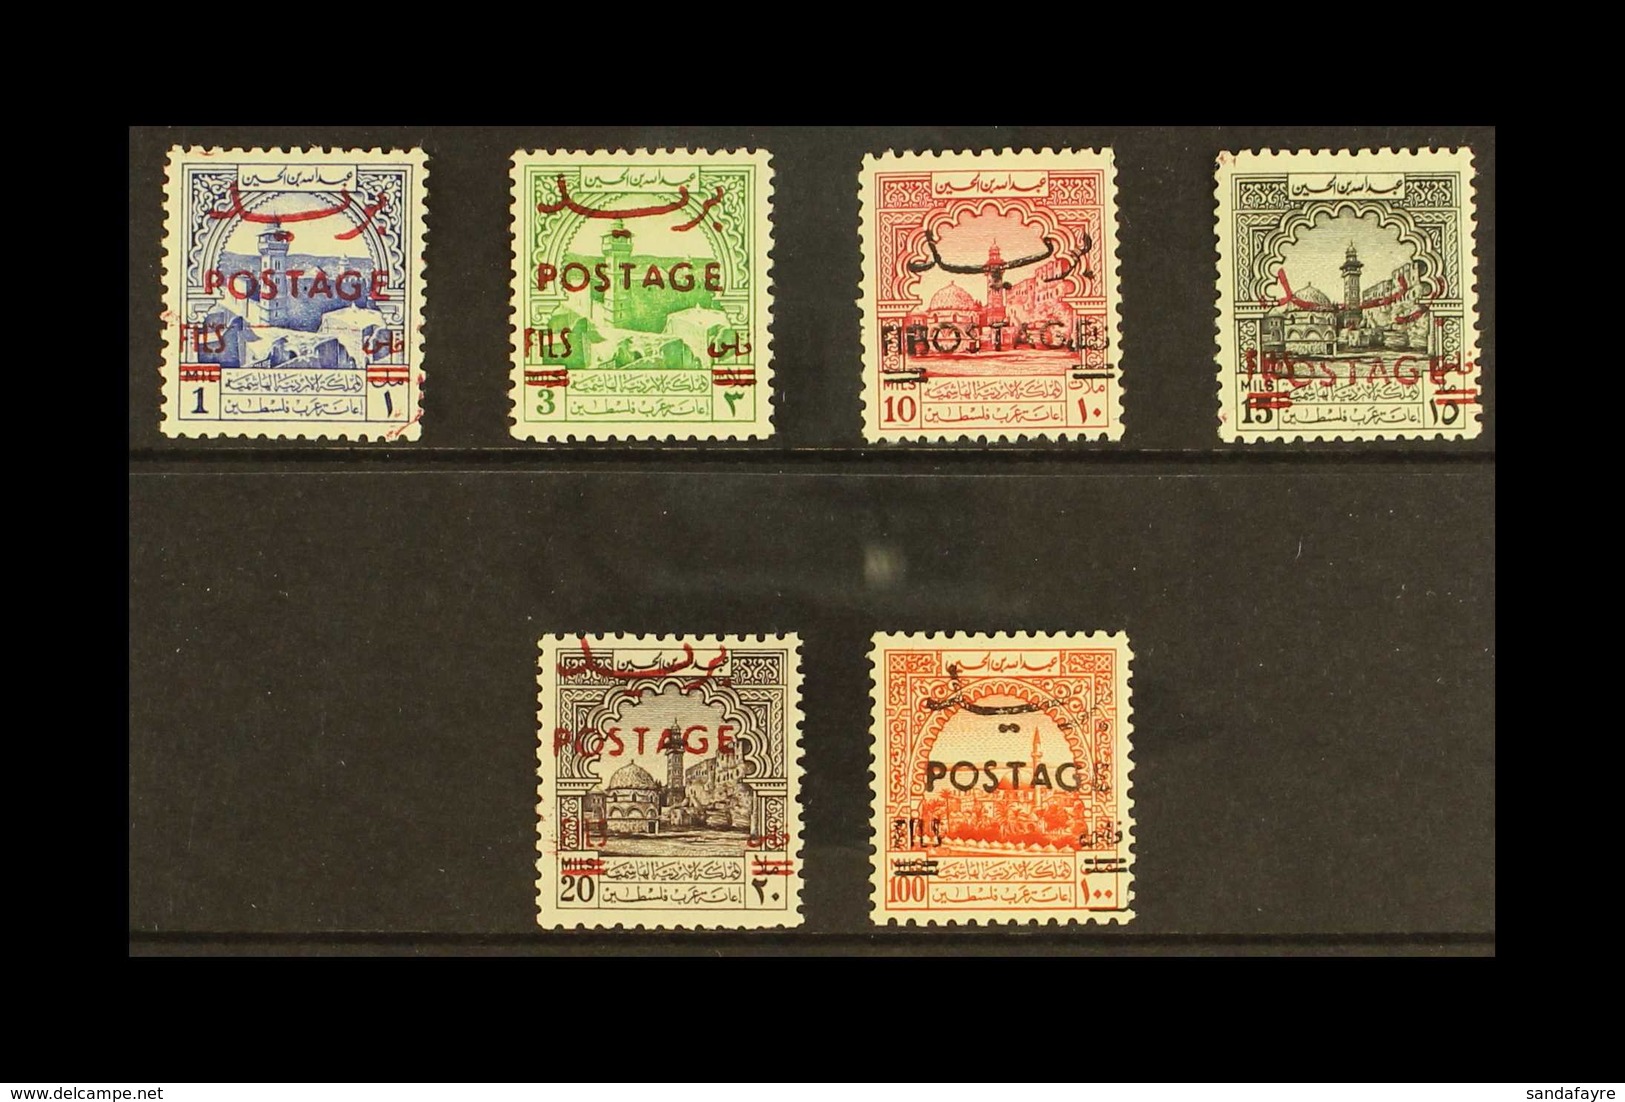 1955 Postage In "Fils" Overprinted On Obligatory Tax Stamps Inscribed "Mils", 1f On 1m To 100f On 100m, Set Complete, SG - Giordania